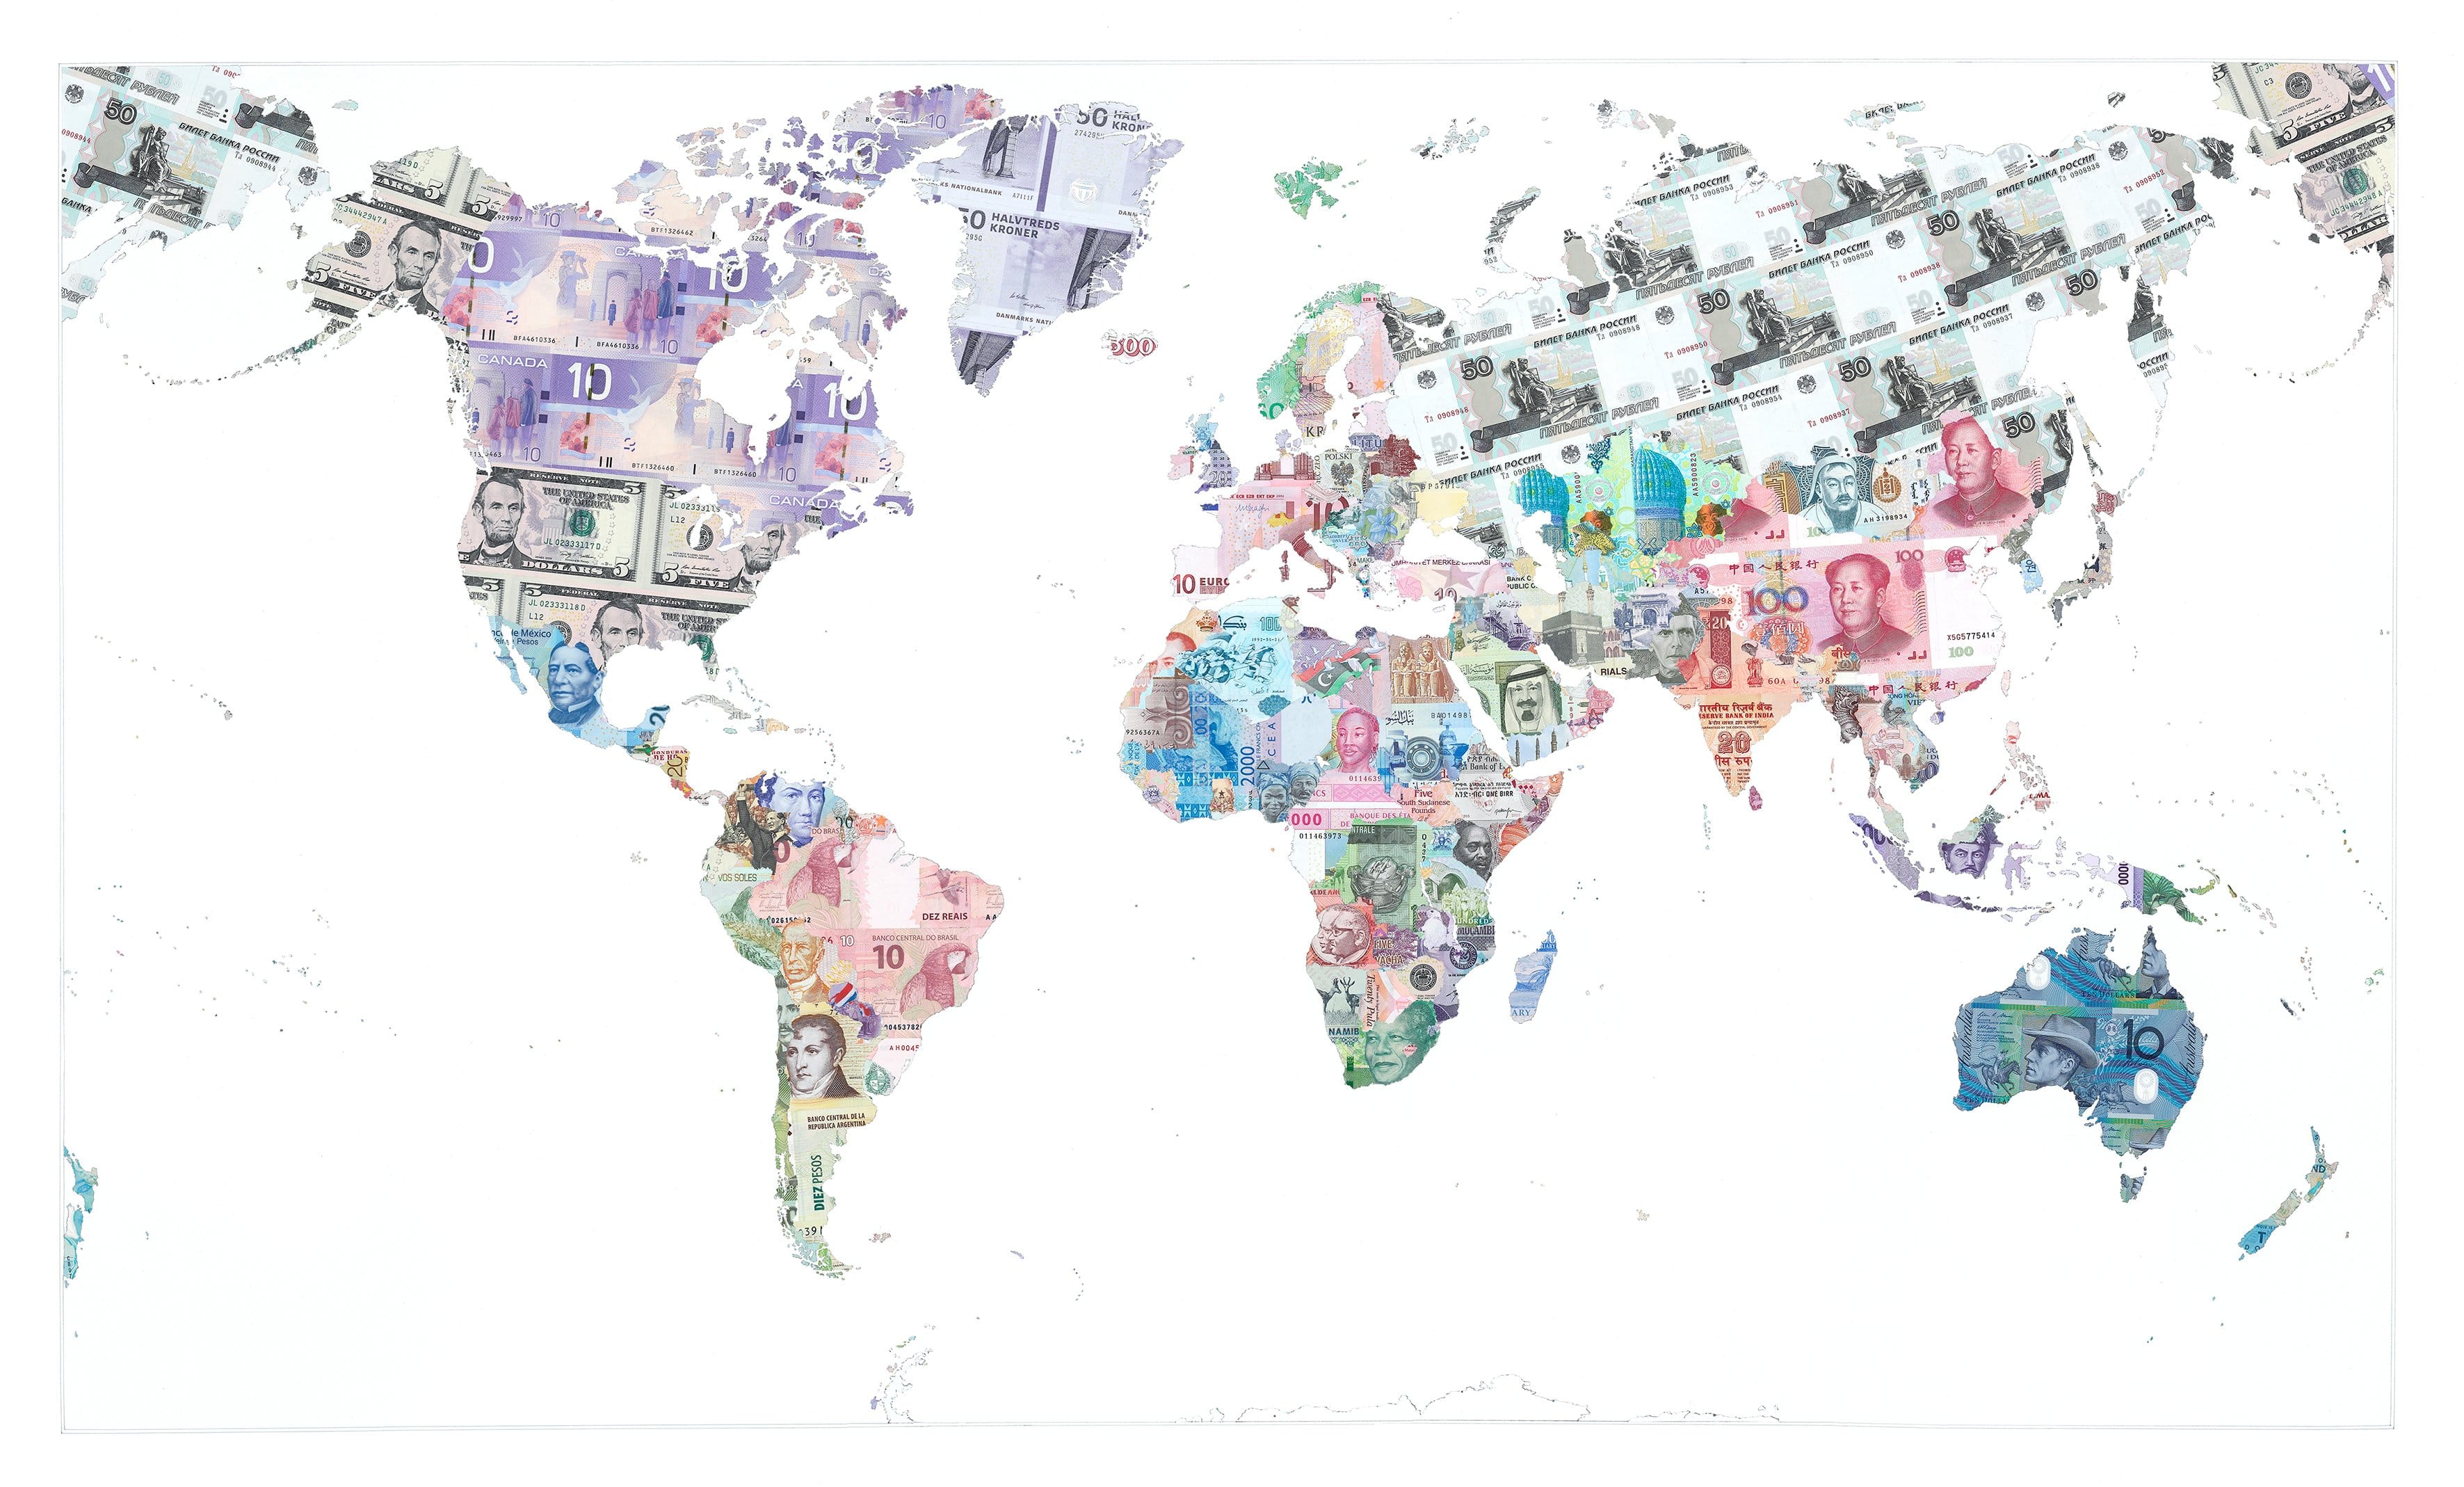 Money Map of the World 2013 Enlarged